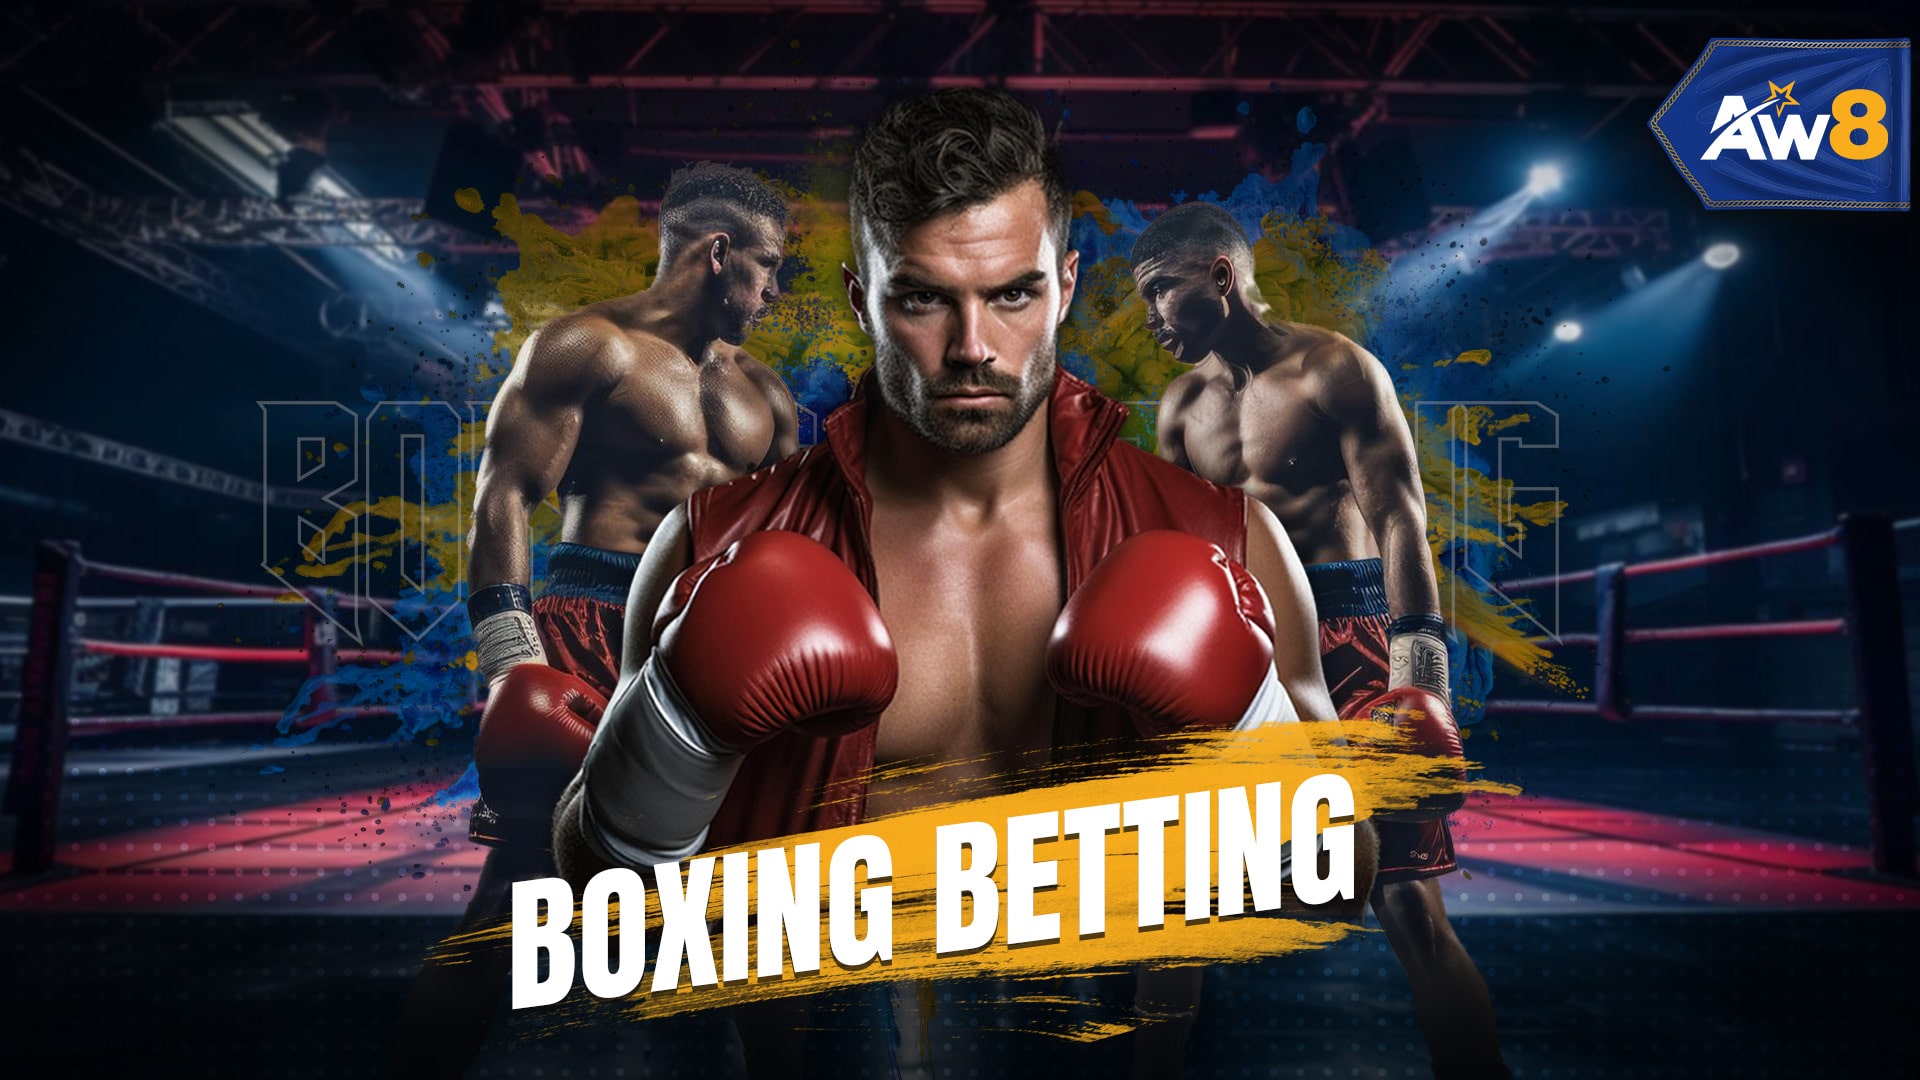 bet on boxing in malaysia with AW8